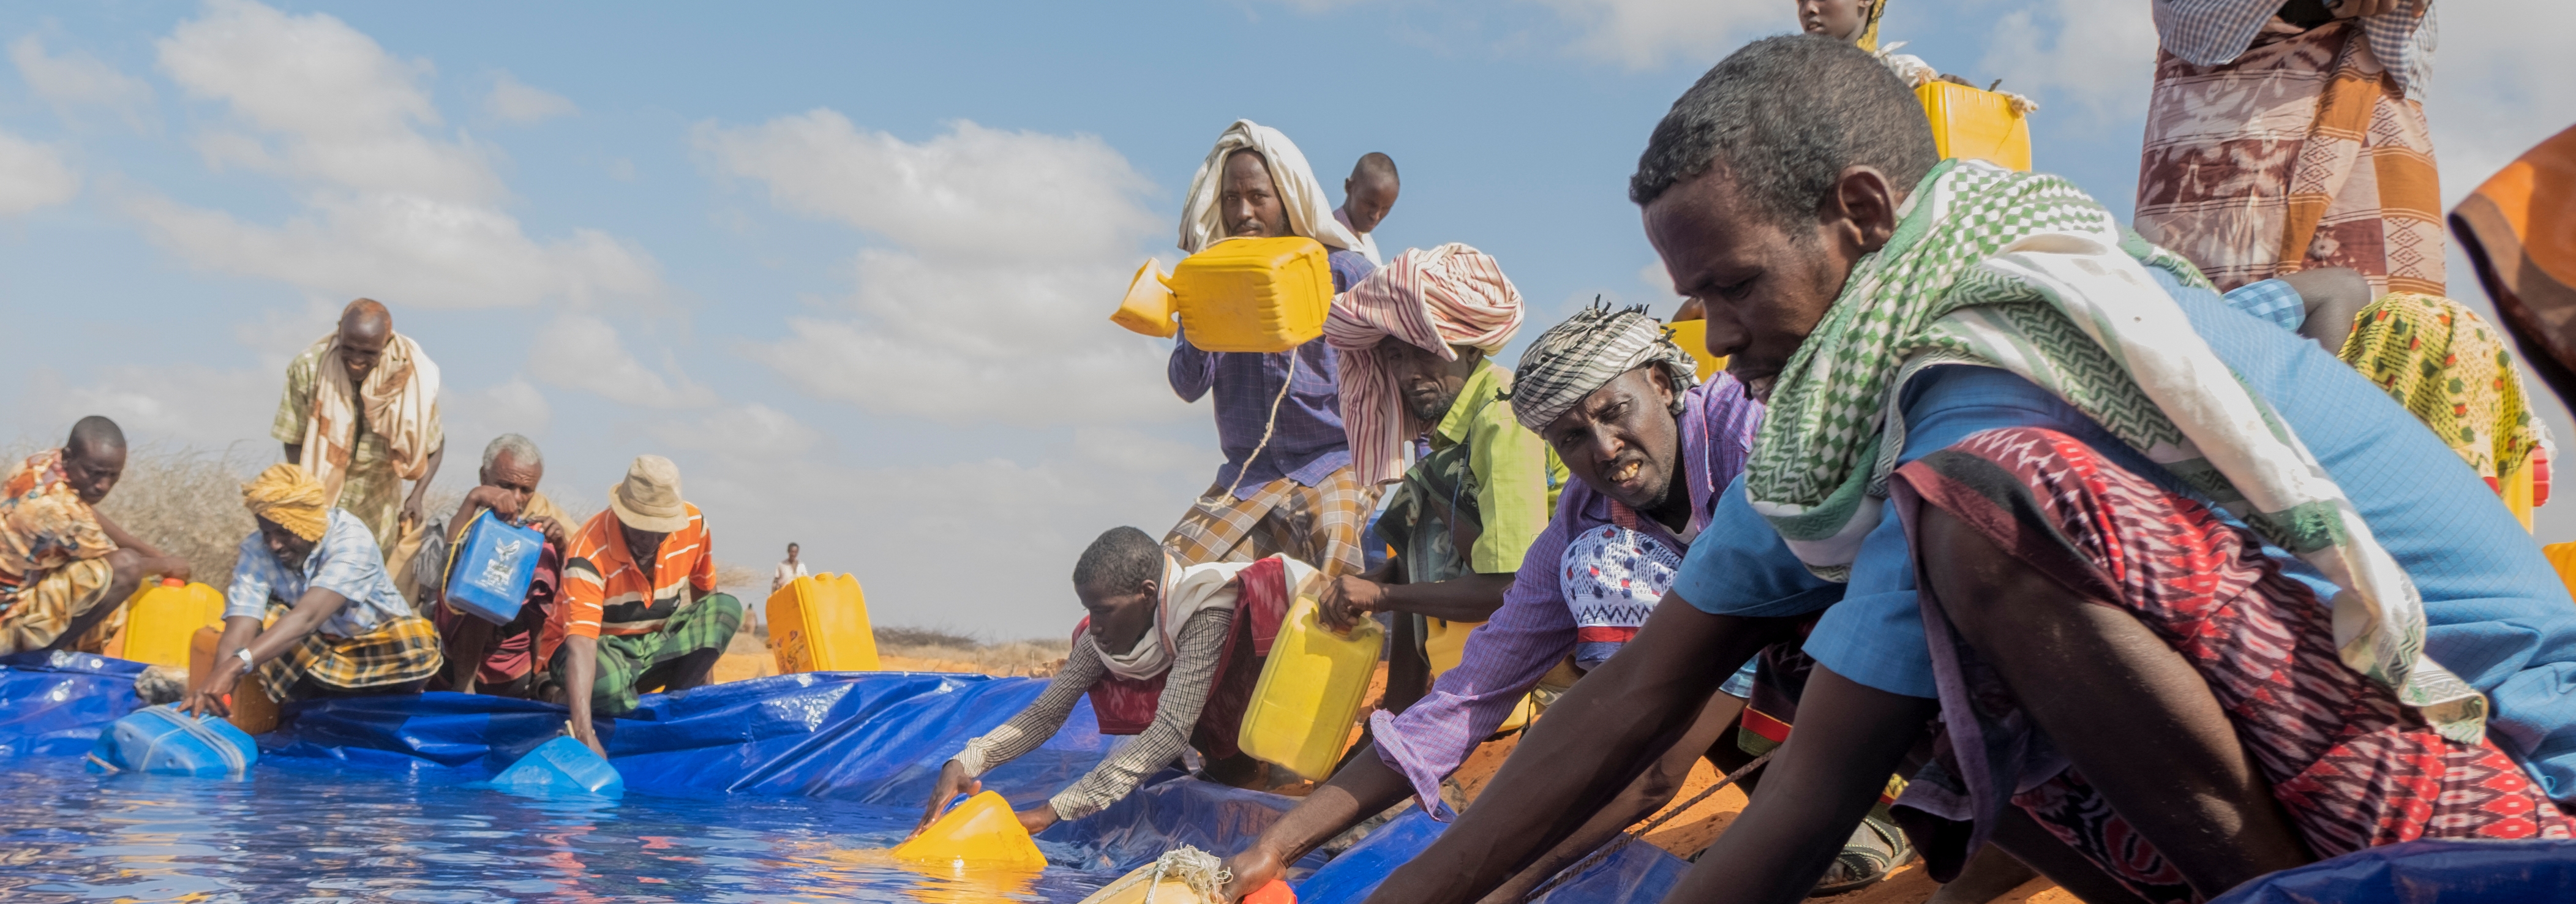 Communities in Galmudug collect water from a water reservoir filled up through an IOM water trucking activity. © IOM 2022 / Ismail Salad Osman